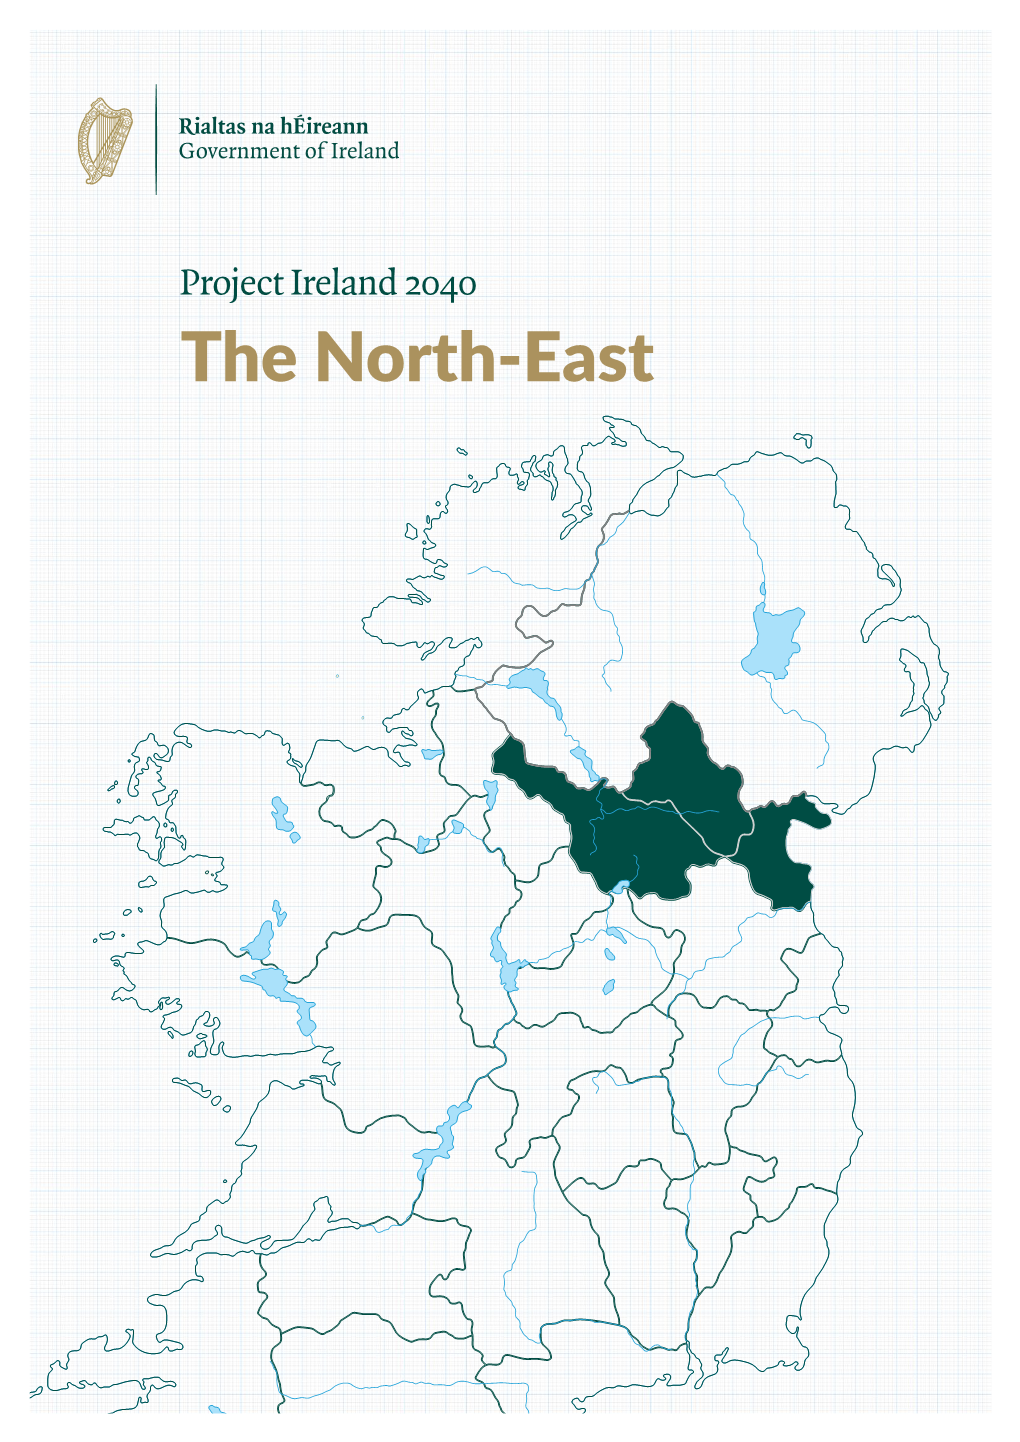 The North-East Project Ireland 2040 in the North-East